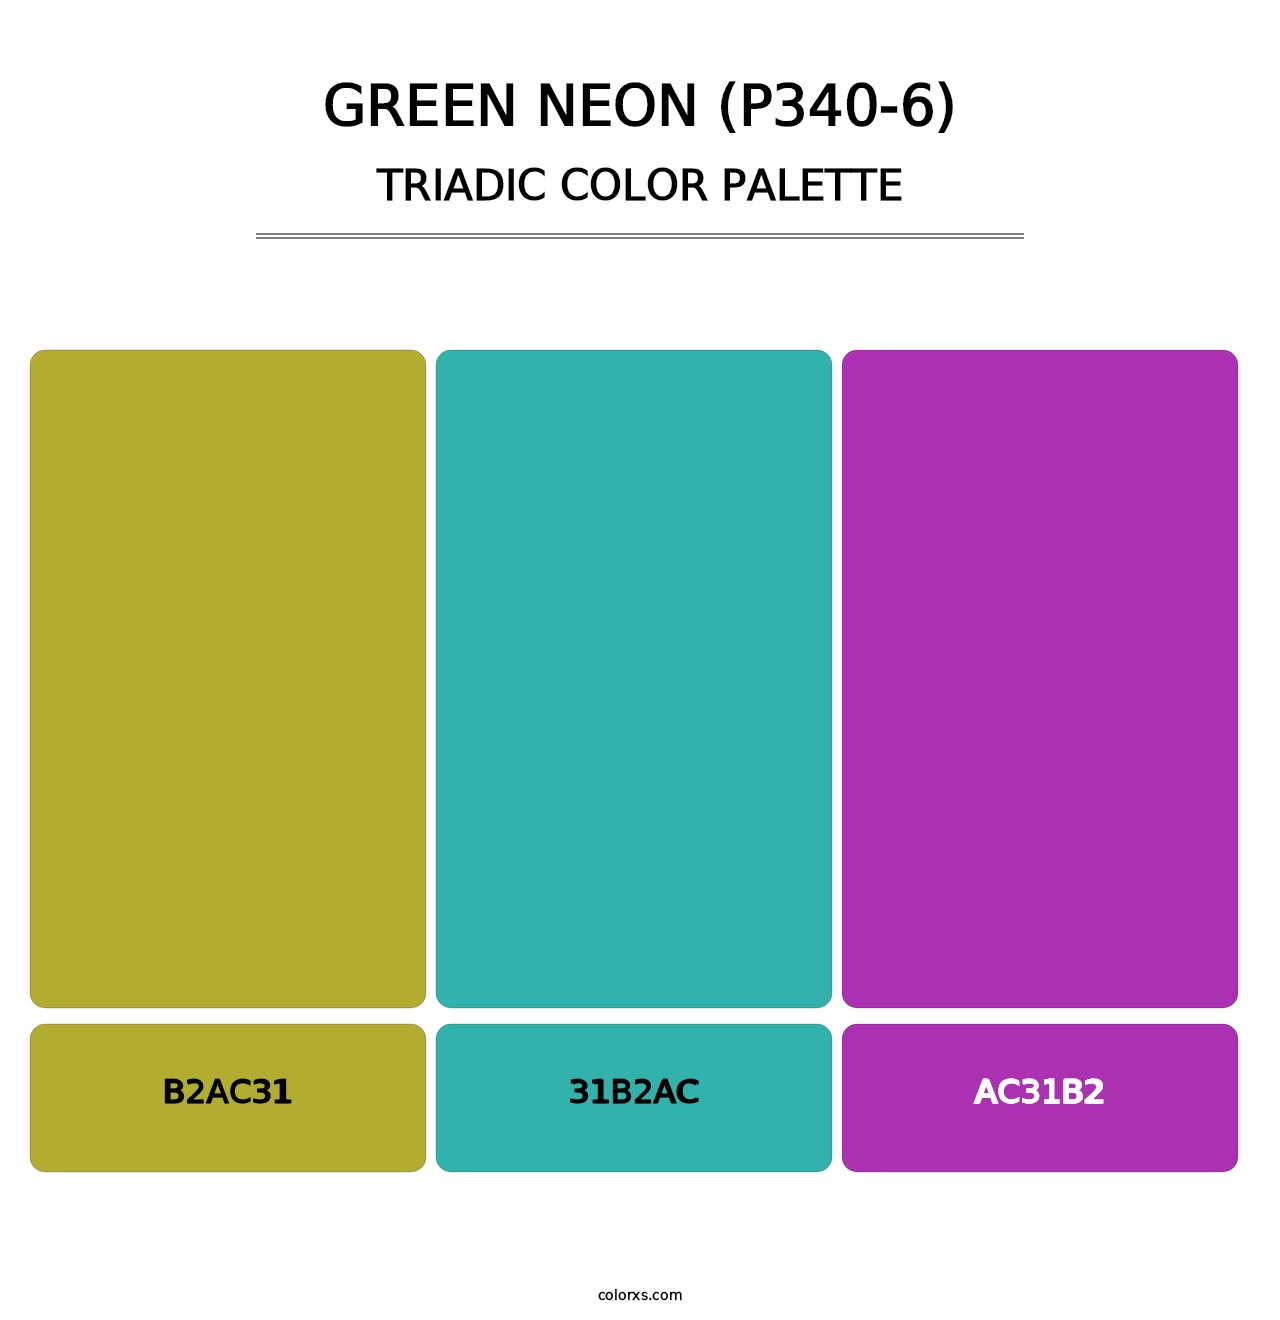 Green Neon (P340-6) - Triadic Color Palette